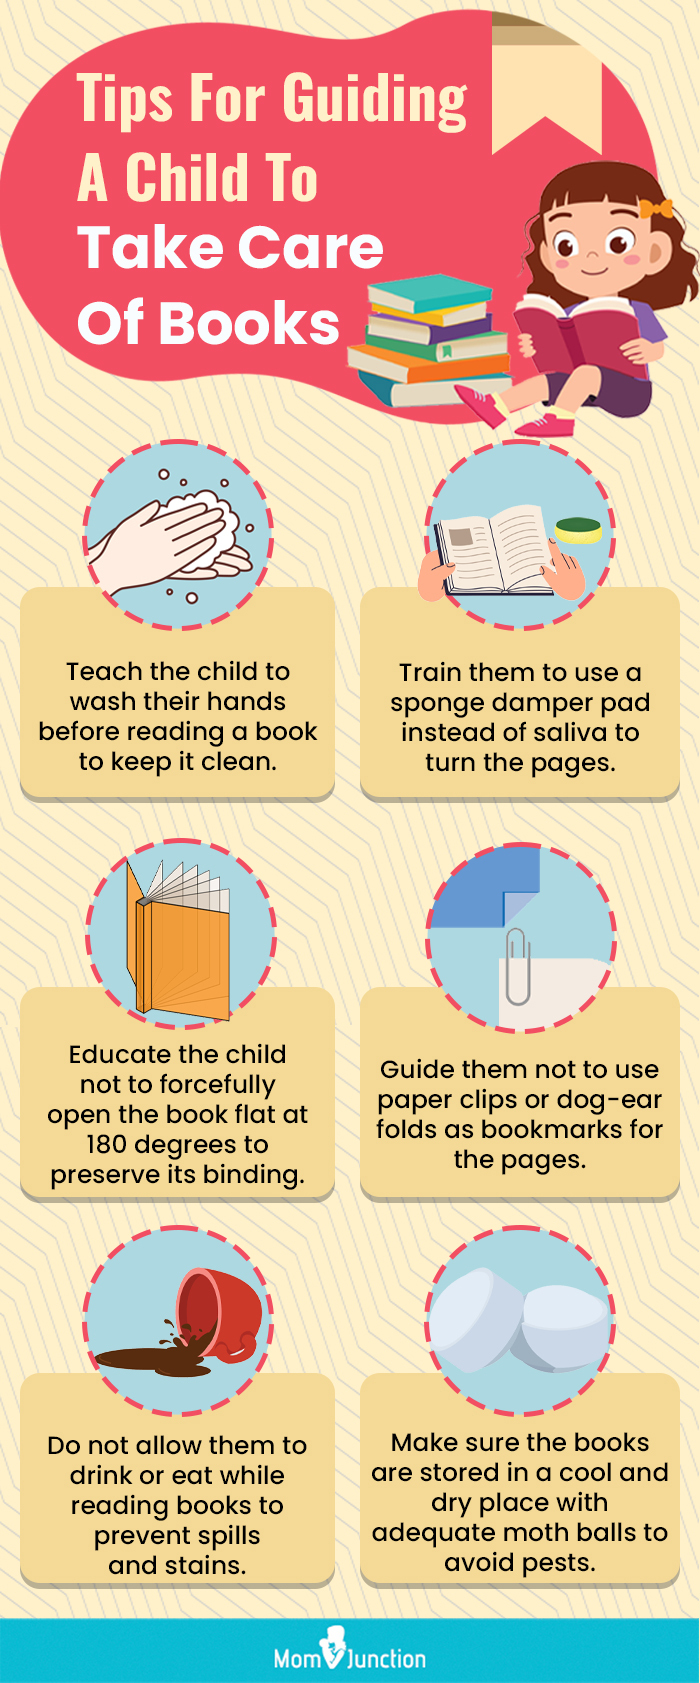 Tips For Guiding A Child To Take Care Of Books (infographic)